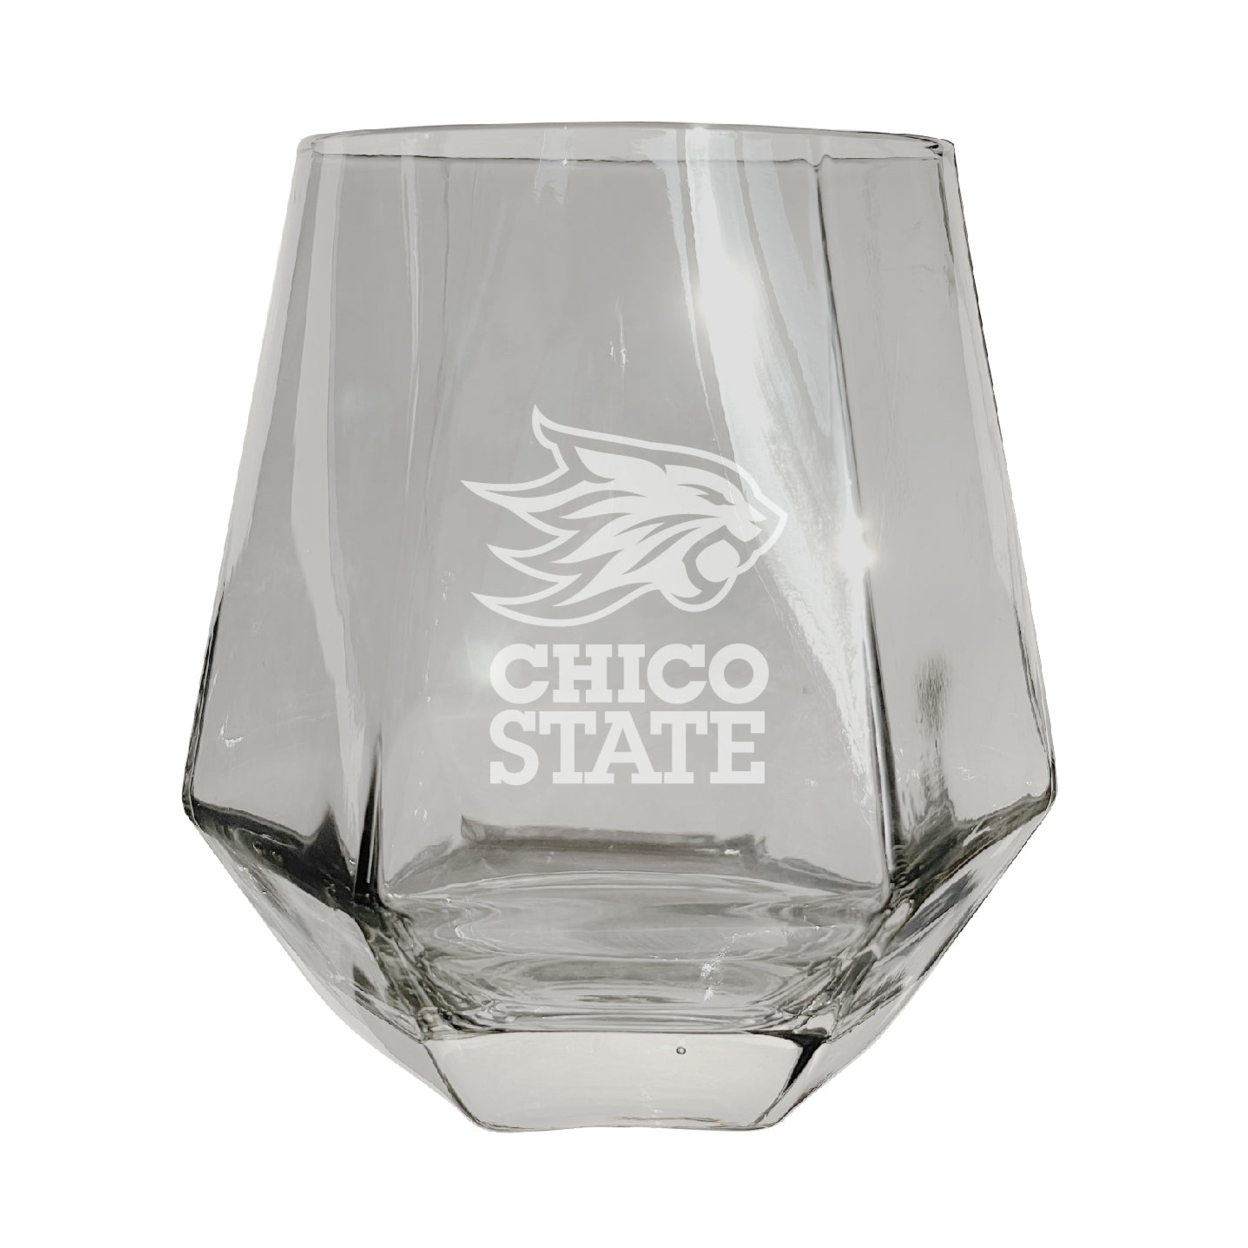 California State University, Chico Etched Diamond Cut Stemless 10 Ounce Wine Glass Clear